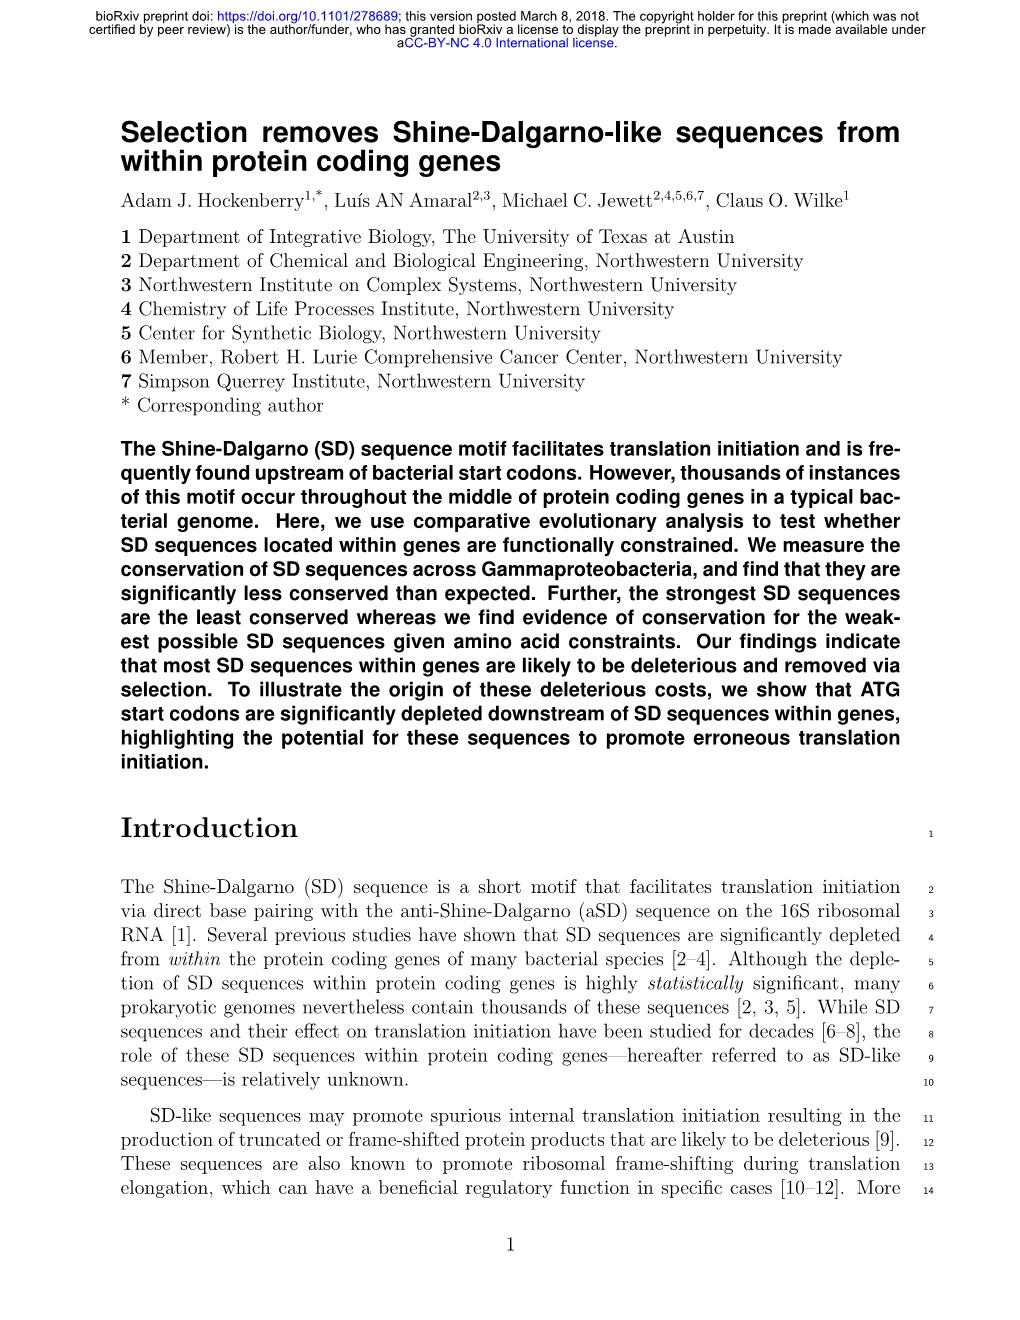 Selection Removes Shine-Dalgarno-Like Sequences from Within Protein Coding Genes Adam J